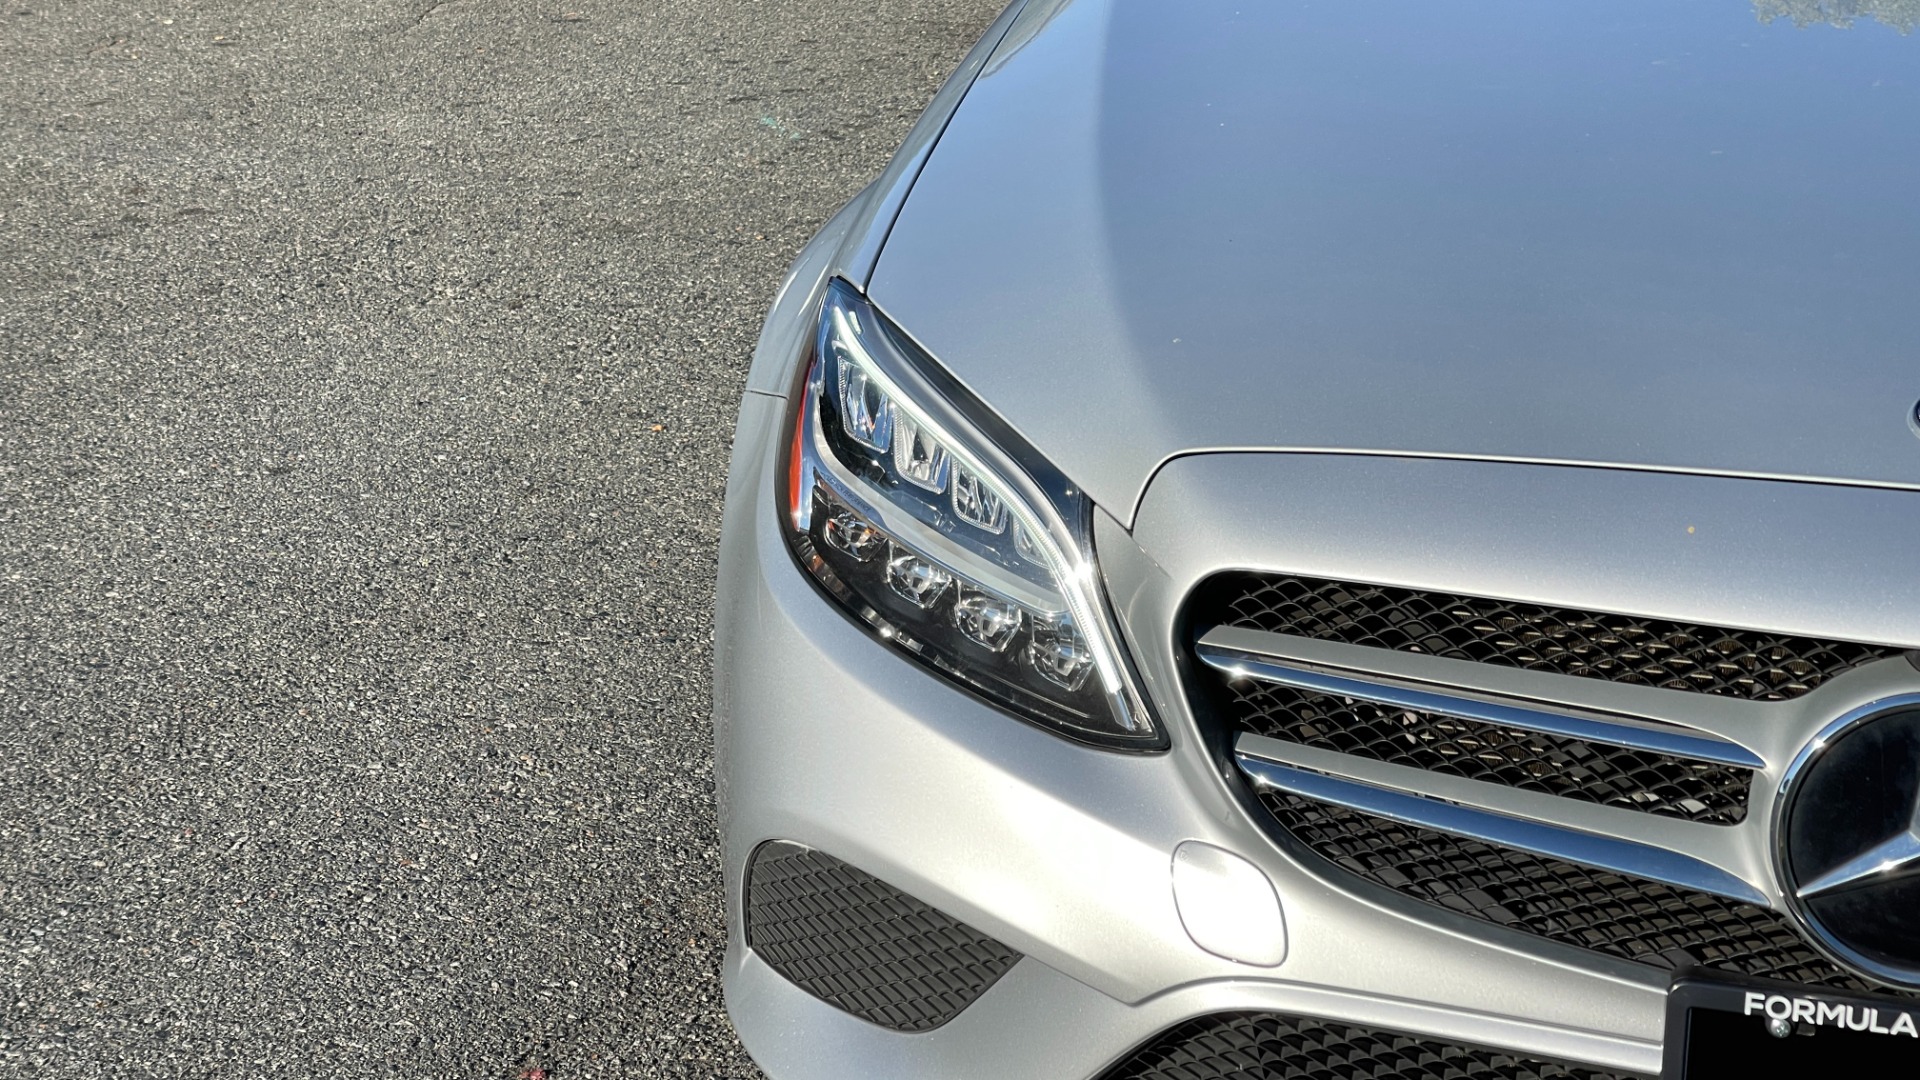 Used 2020 Mercedes-Benz C-Class C300 / BACKUP CAMERA / HEATED SEATS / WOOD GRAIN TRIM for sale $30,995 at Formula Imports in Charlotte NC 28227 34